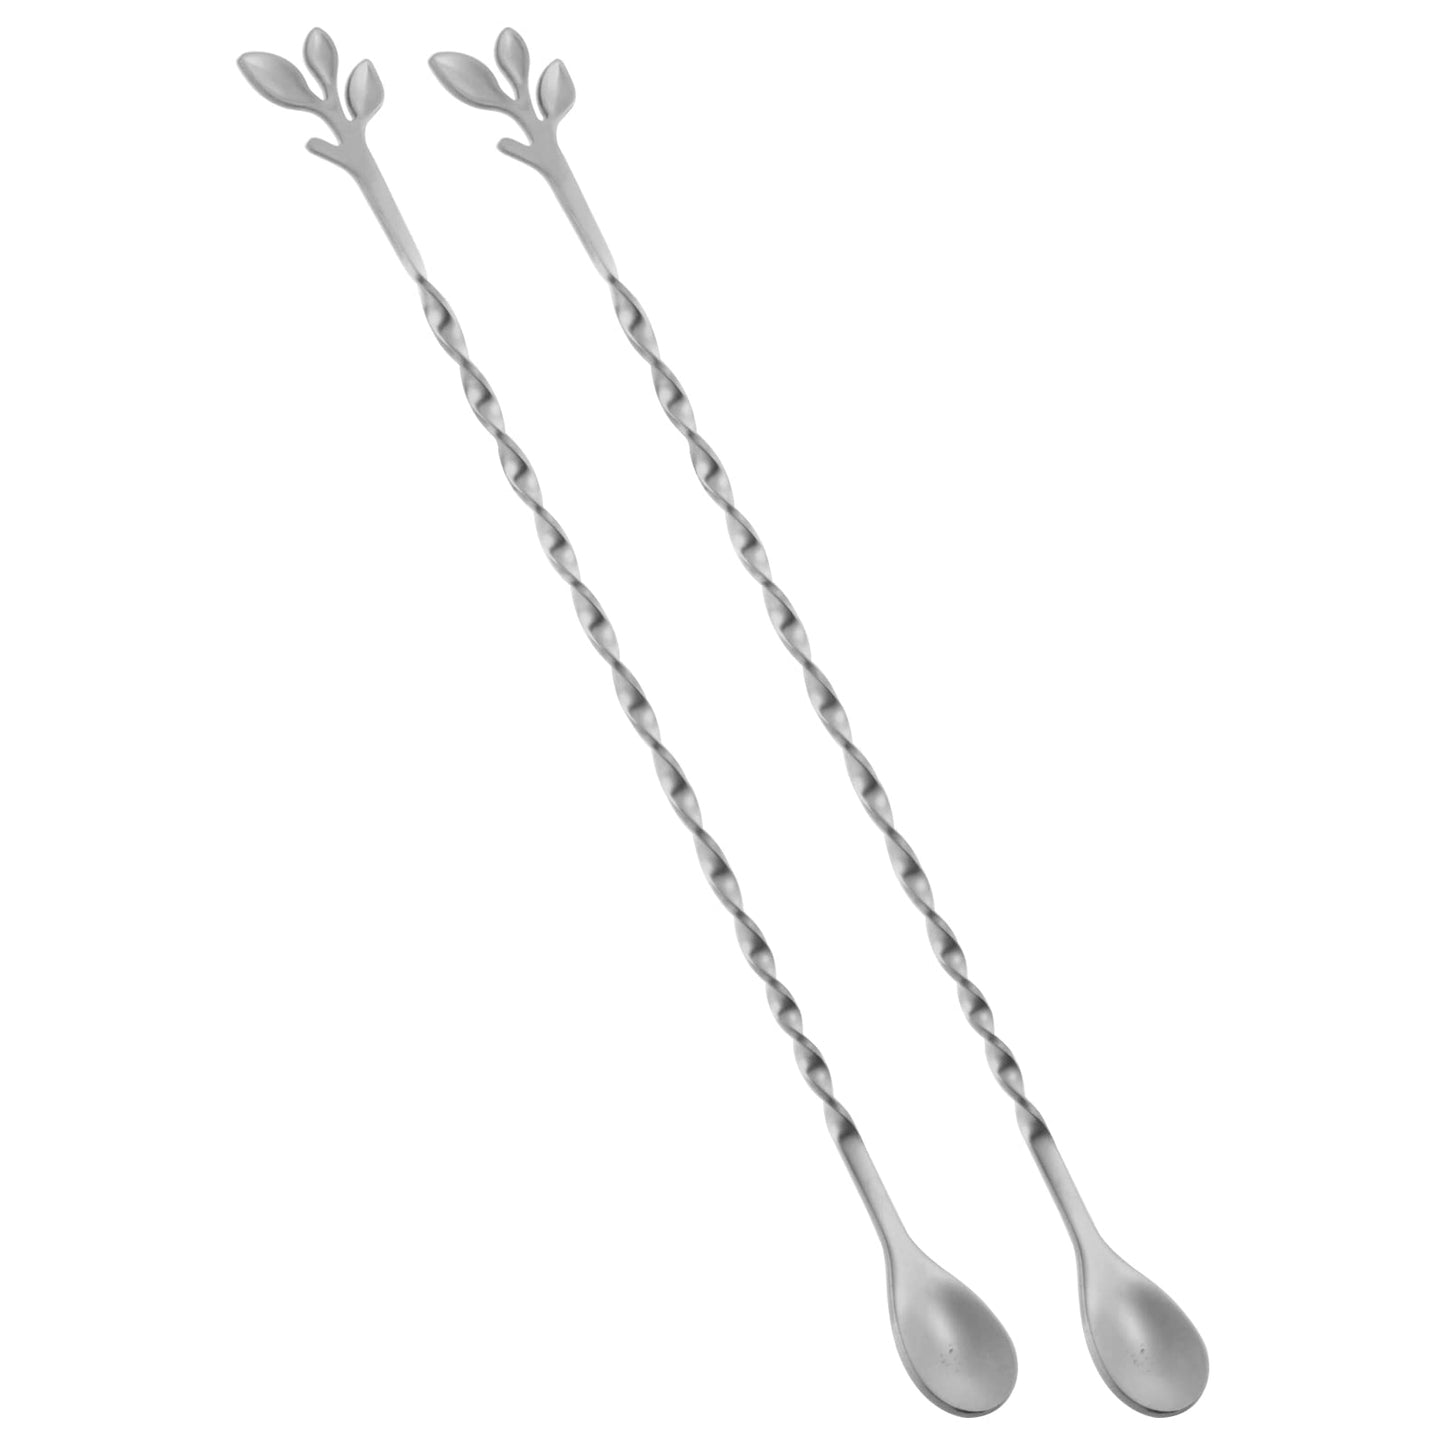 AnSaw 10-Inch Leaf Handle Bar Spoon,2-Pieces Long Handle Cocktail Mixing Stirrers,Stainless Steel,Silver